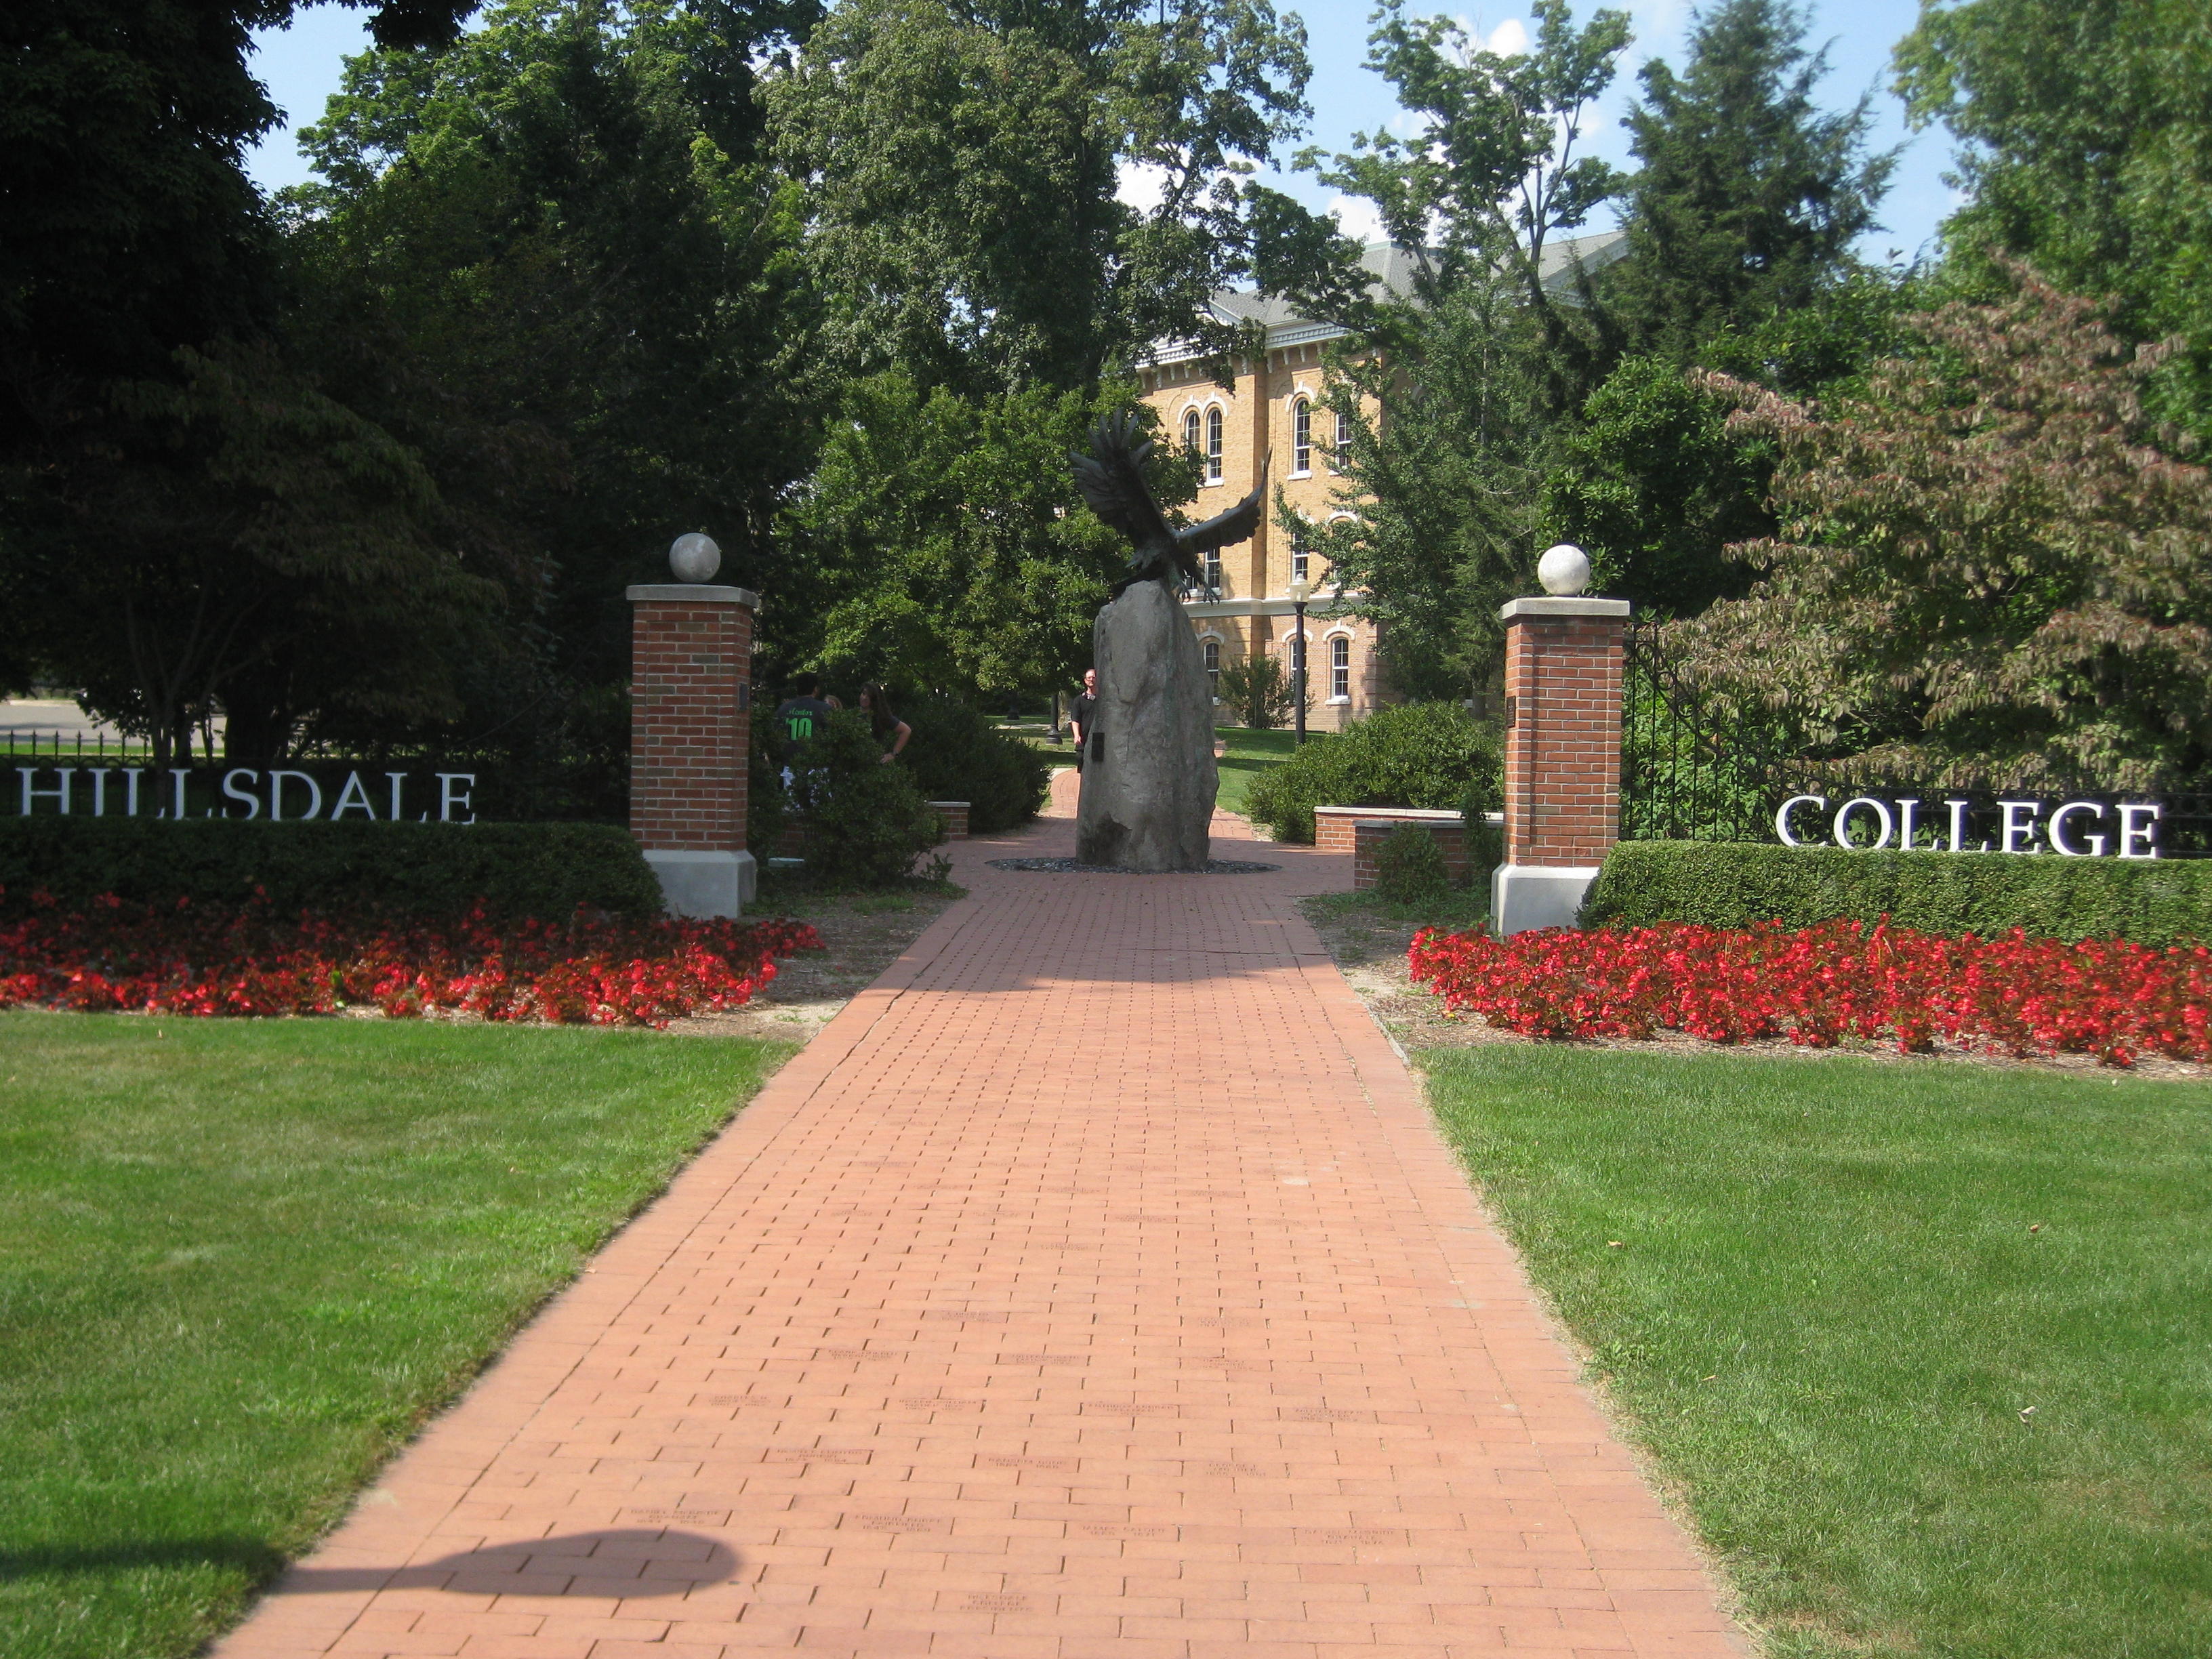 the federalist papers hillsdale college